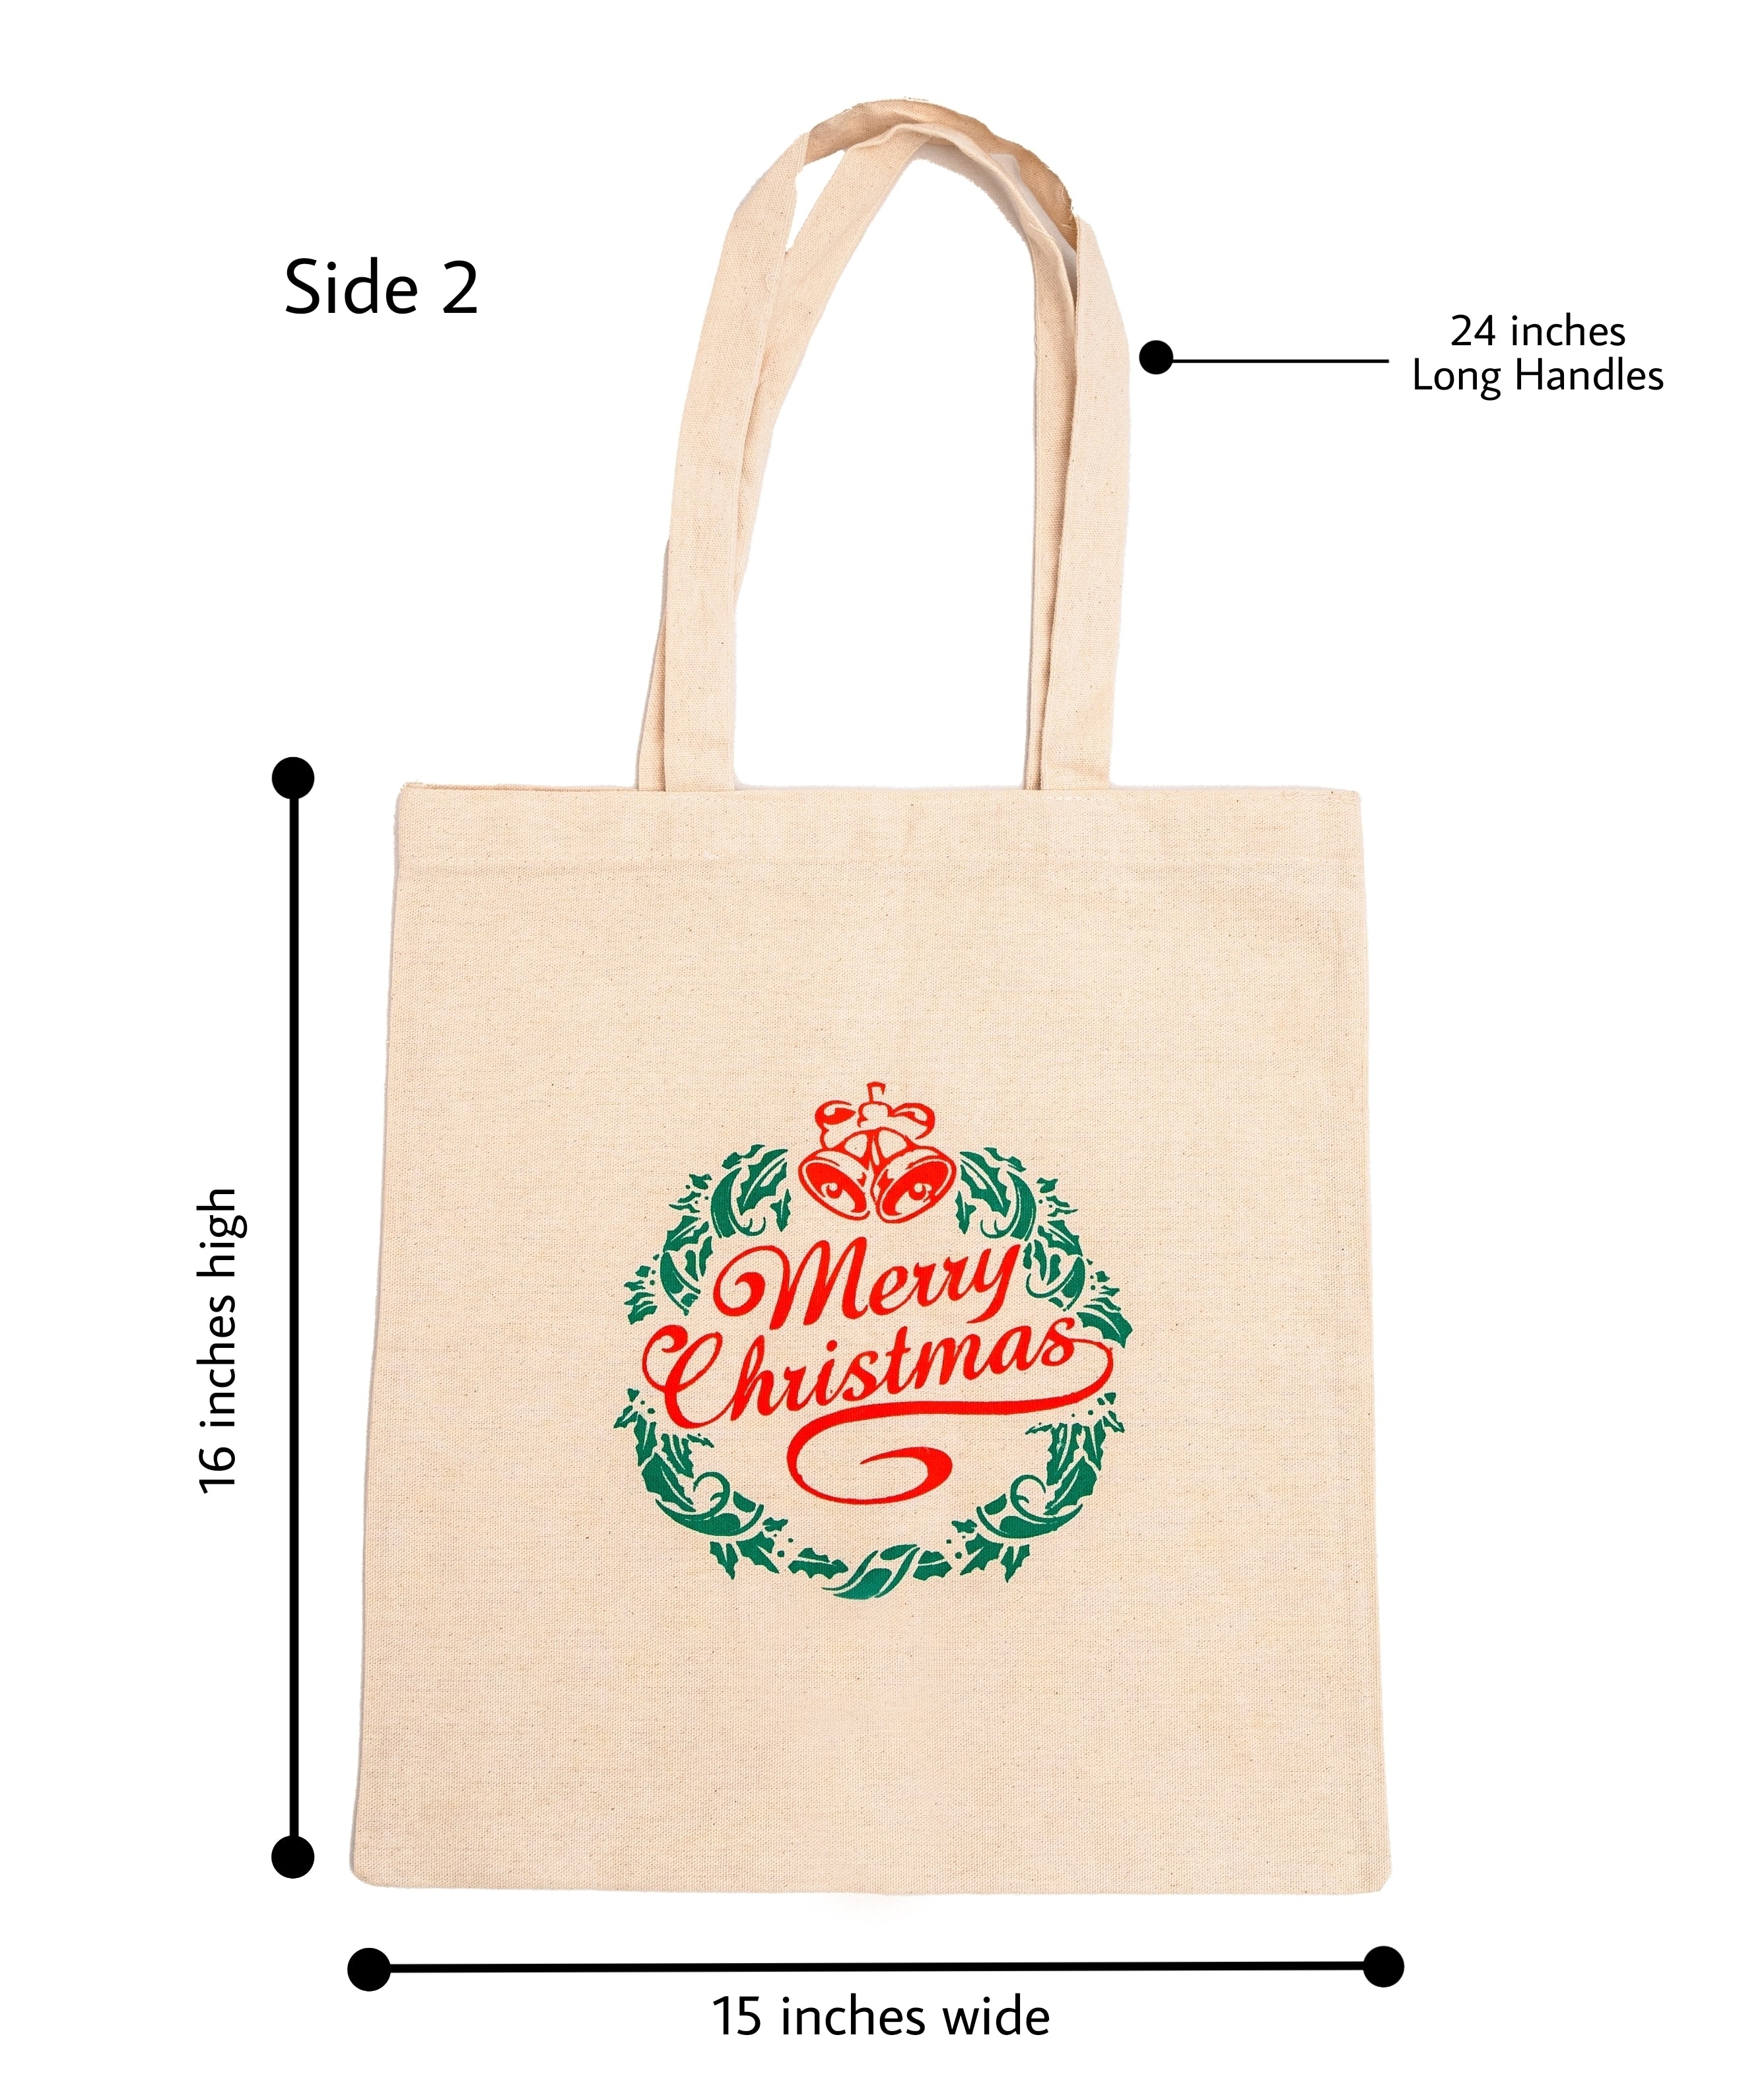 merry christmas cotton tote bag with long handle with size